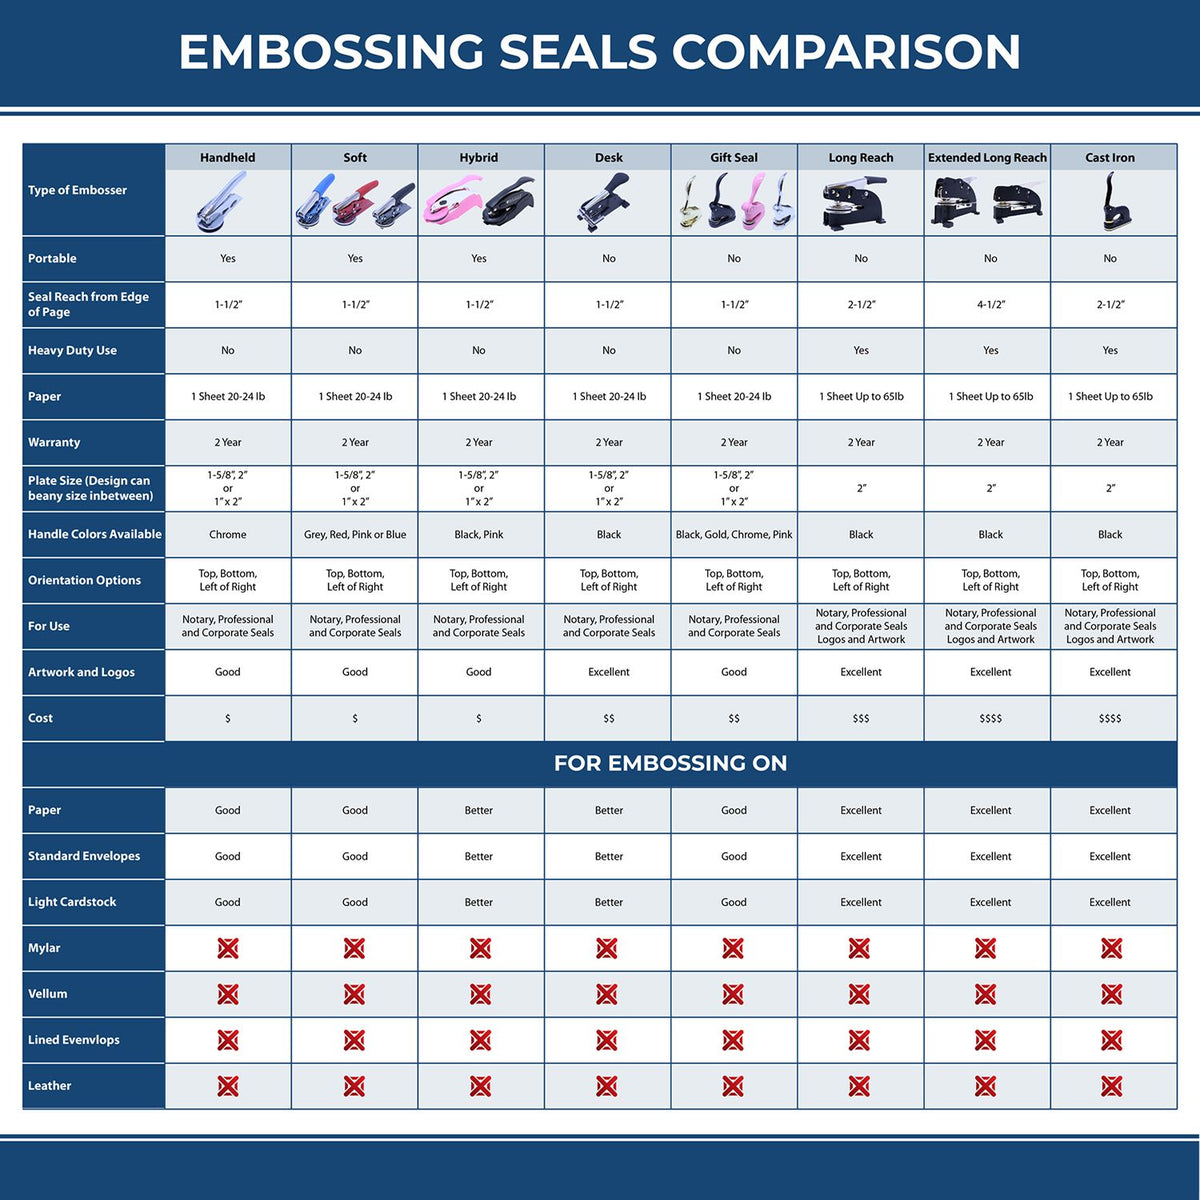 A comparison chart for the different types of mount models available for the Handheld Massachusetts Professional Geologist Embosser